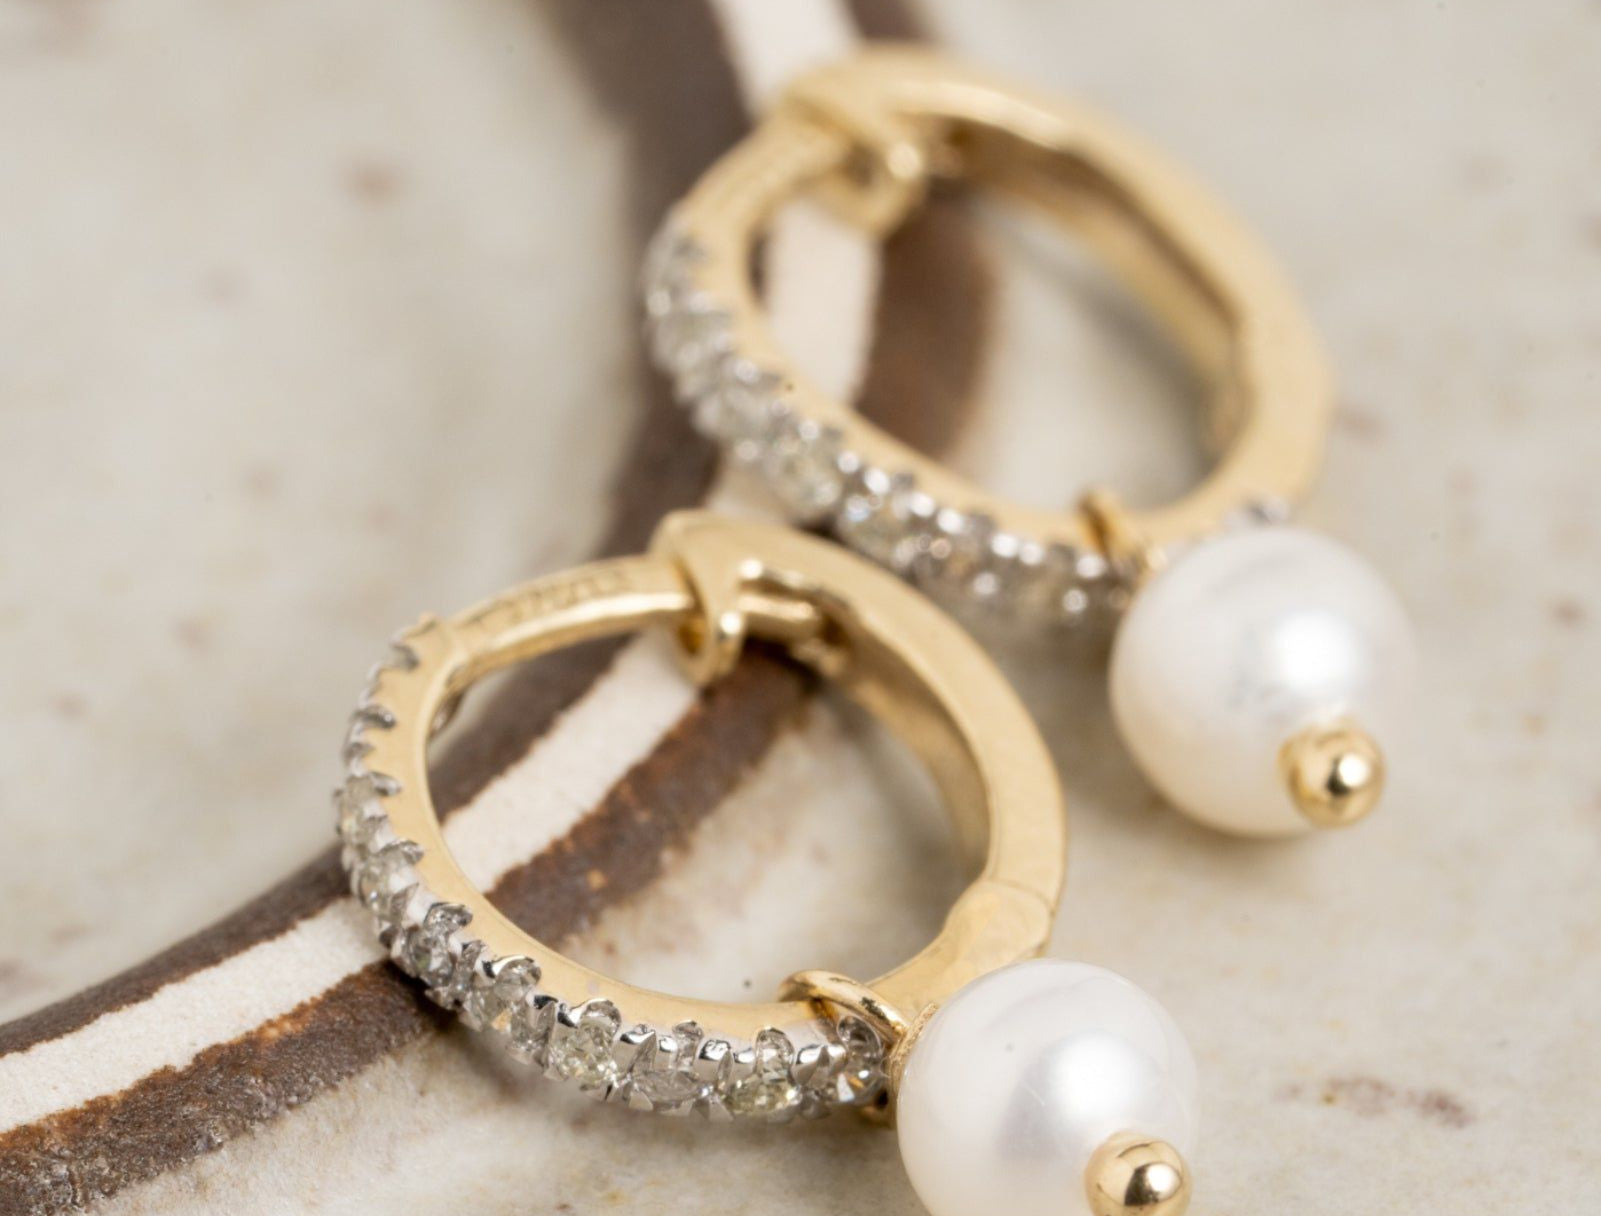 Picture of  Luna Rae solid 9k gold Adeline Huggies in Solid 9K Gold with Diamonds & Freshwater Pearls